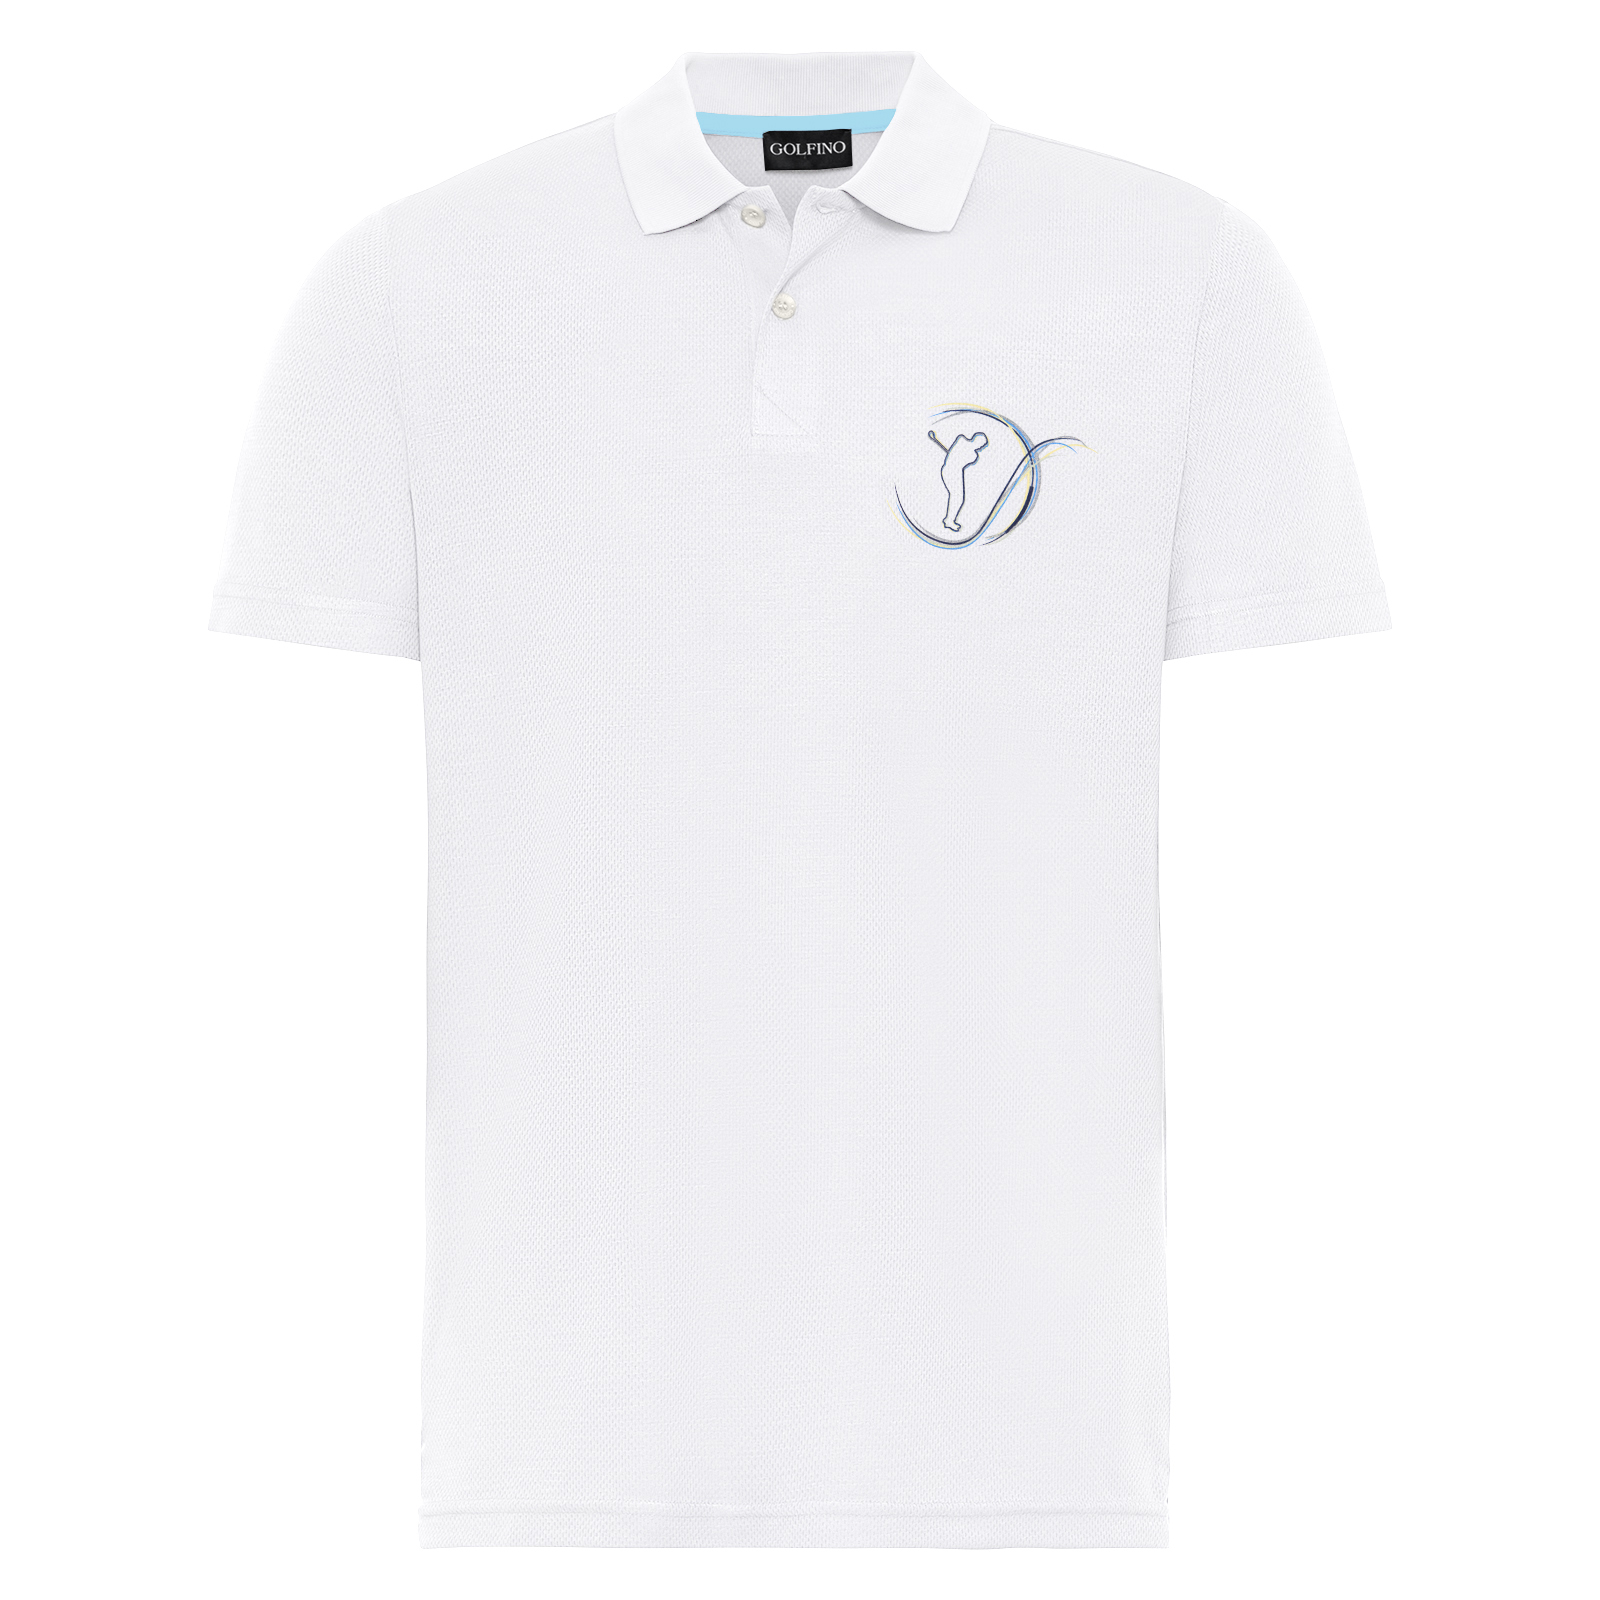 Men’s classic golf polo shirt made from sustainable lyocell with moisture management function 